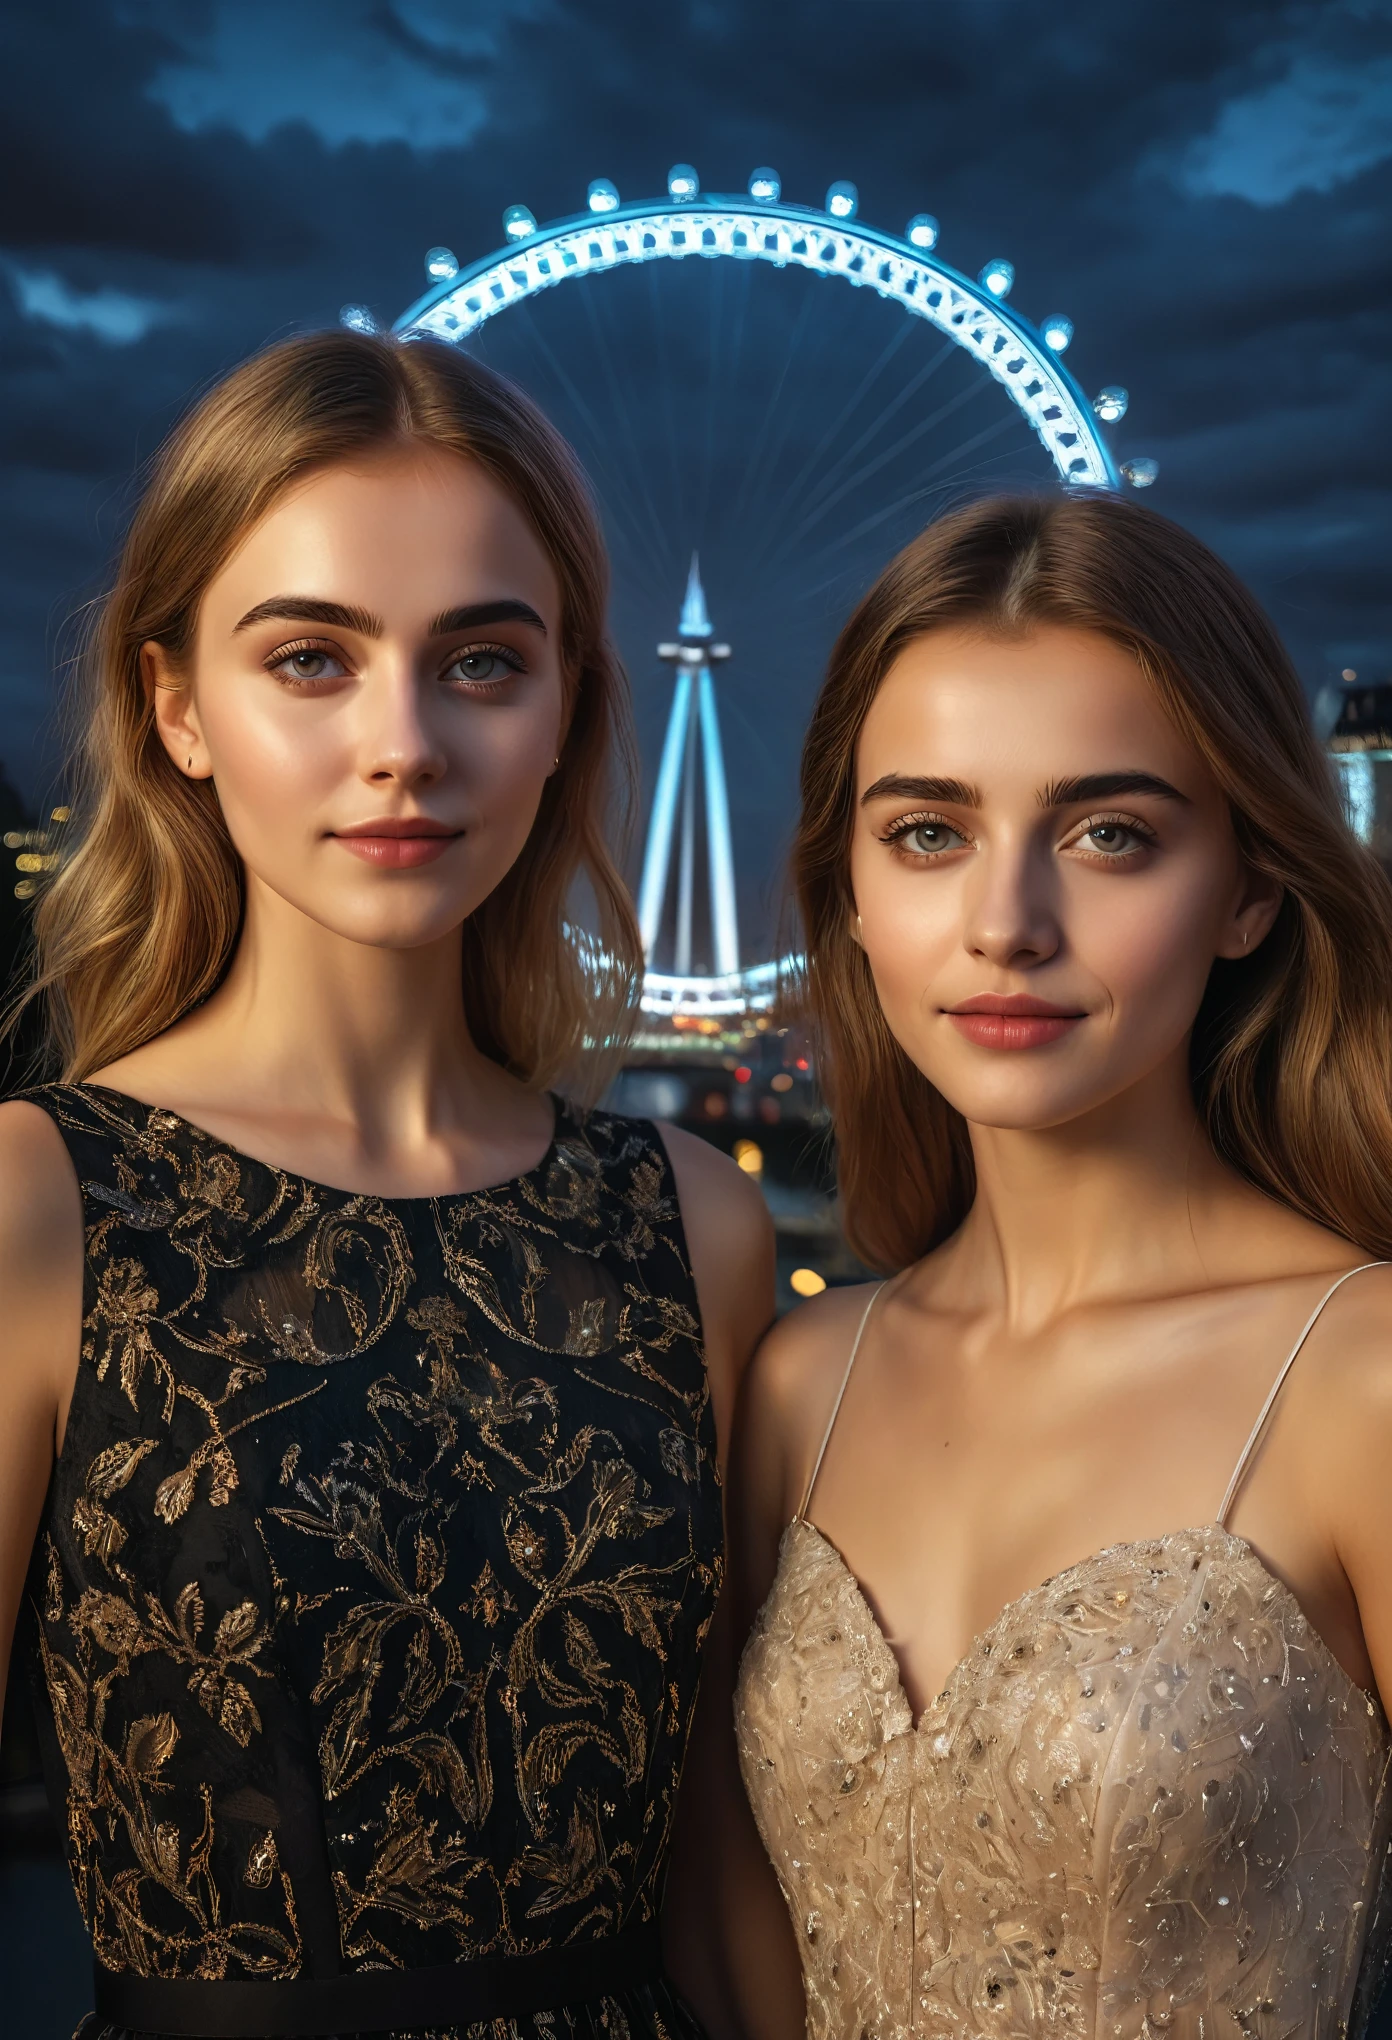 (best quality,4k,8k,highres,masterpiece:1.2),ultra-detailed,(realistic,photorealistic,photo-realistic:1.37), 2 beautiful British teenage girls standing in front of the London Eye, summer night, 2girls, beautiful detailed eyes, beautiful detailed lips, smiling, extremely detailed eyes and face, long eyelashes, elegant dress, cinematic lighting, dramatic cinematic composition, warm color tones, dramatic cloudy sky, highly detailed, 8k, photorealistic, masterpiece, digital painting, concept art